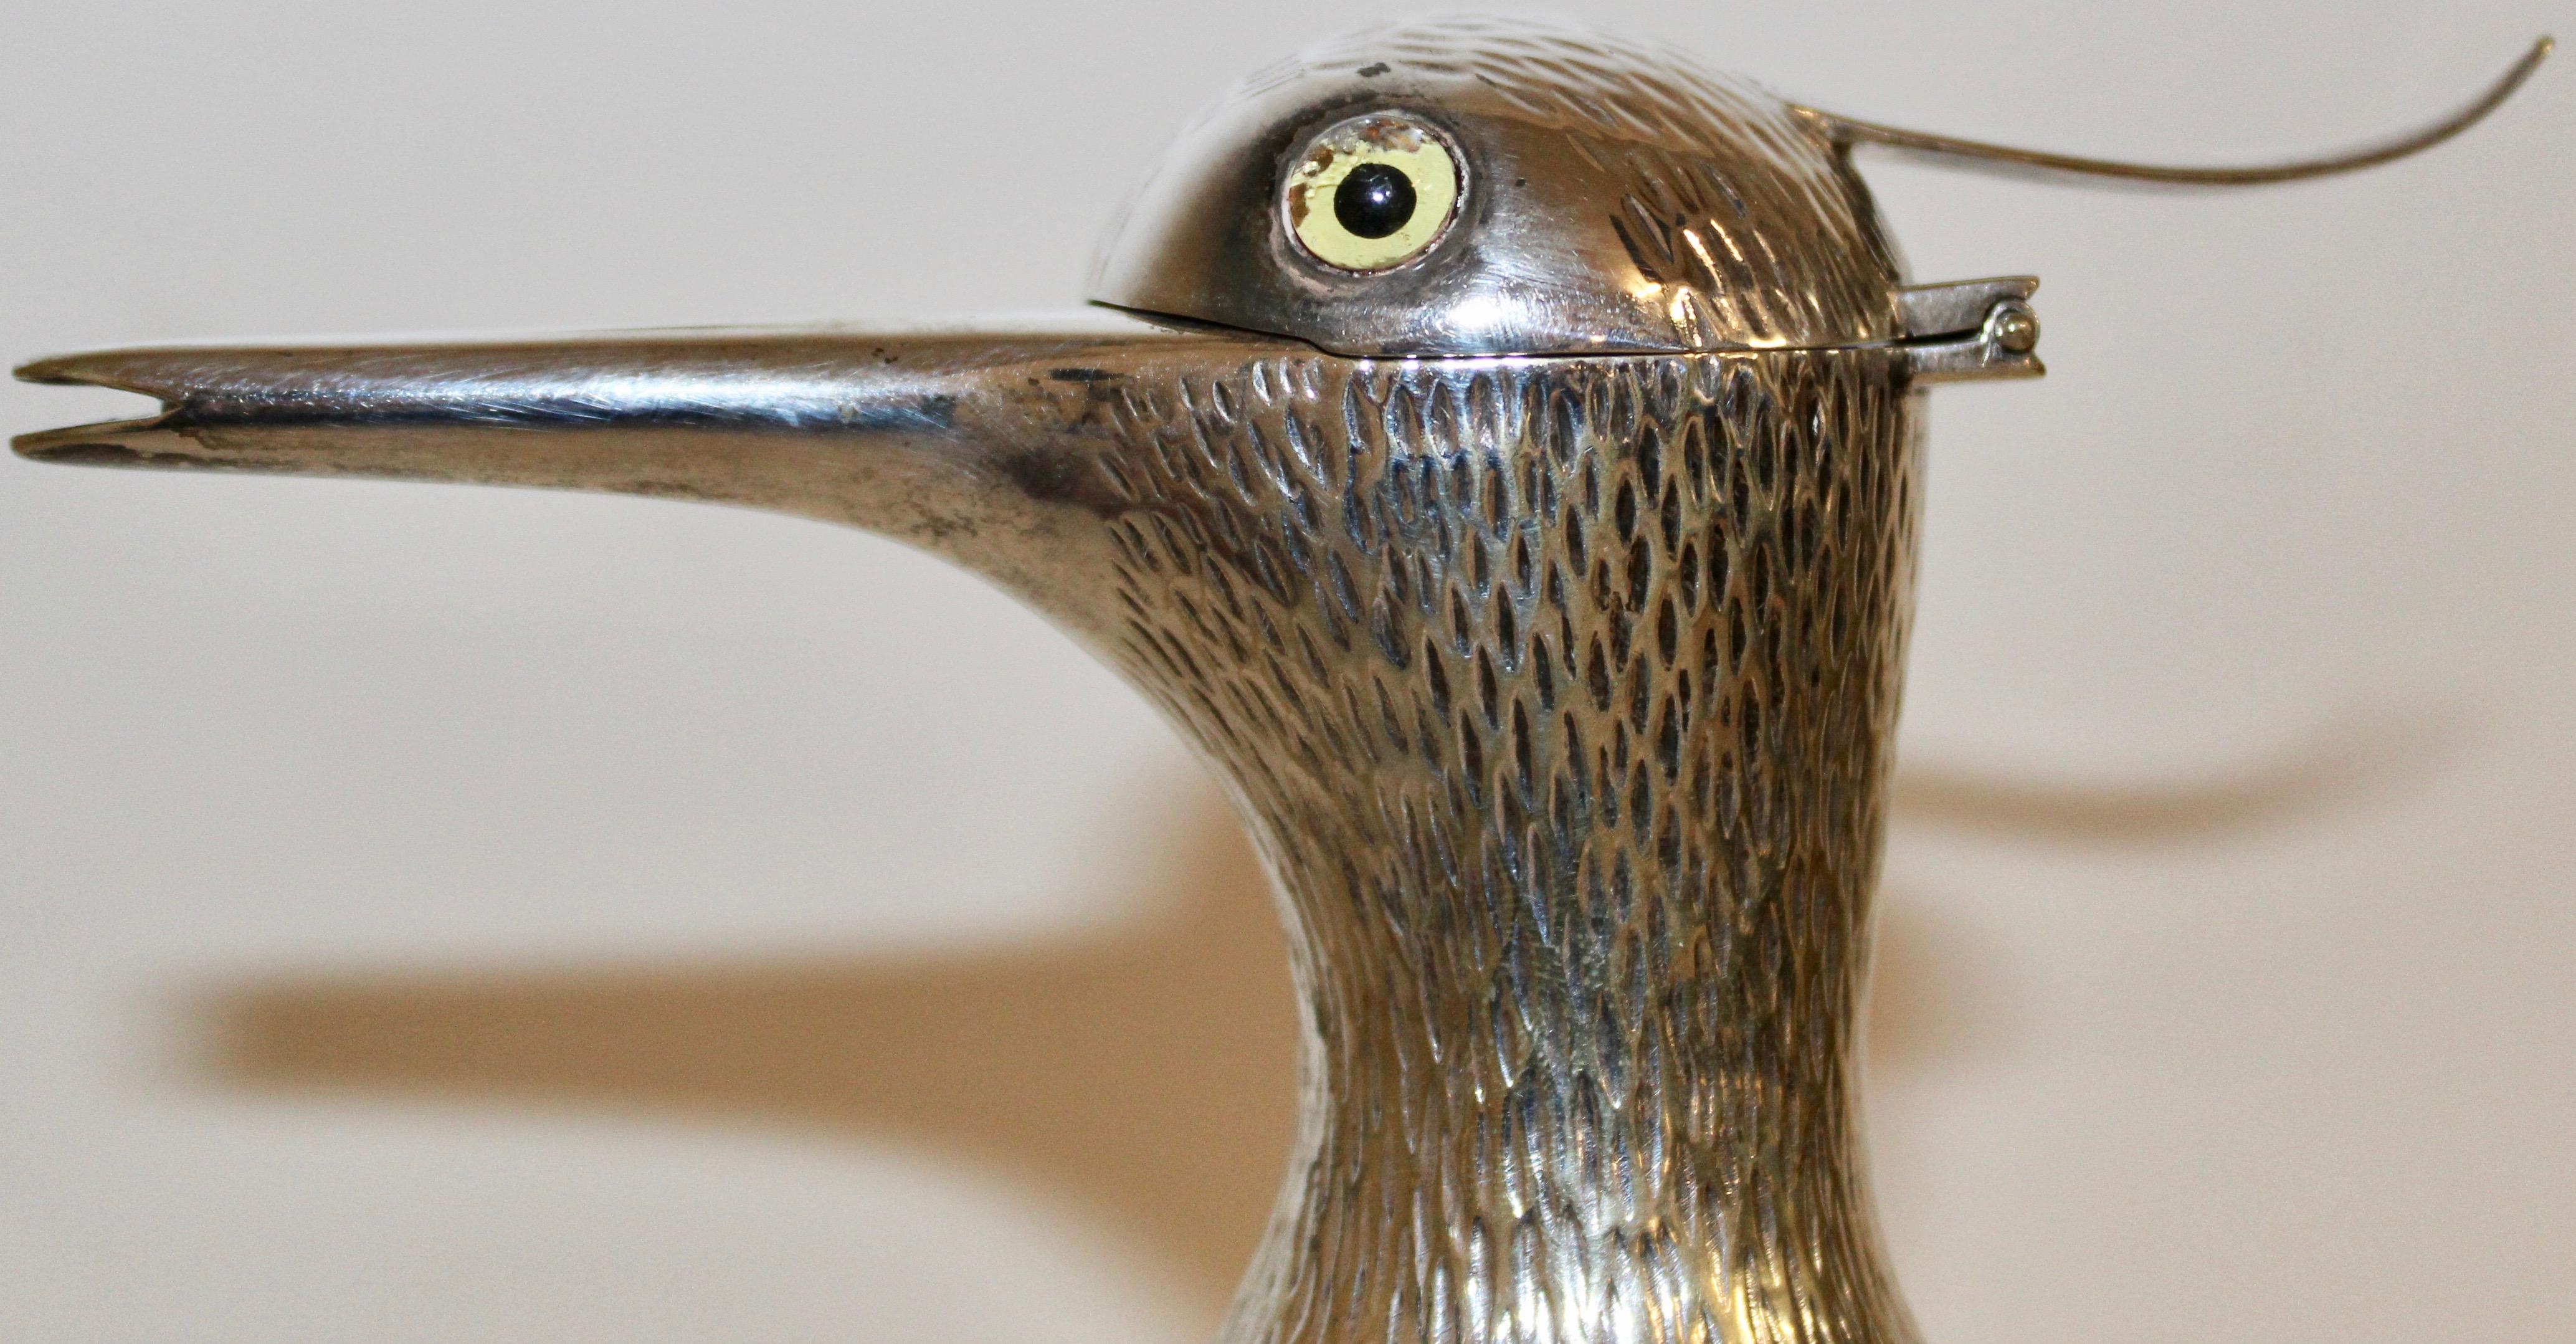 An Austrian glass and silver plate novelty decanter in the form of a bird, the head in silver plate, with a long hollow beak used for pouring from the 1930s. The lid in the shape of a hinged head, complete with glass eye. The silver plate neck with